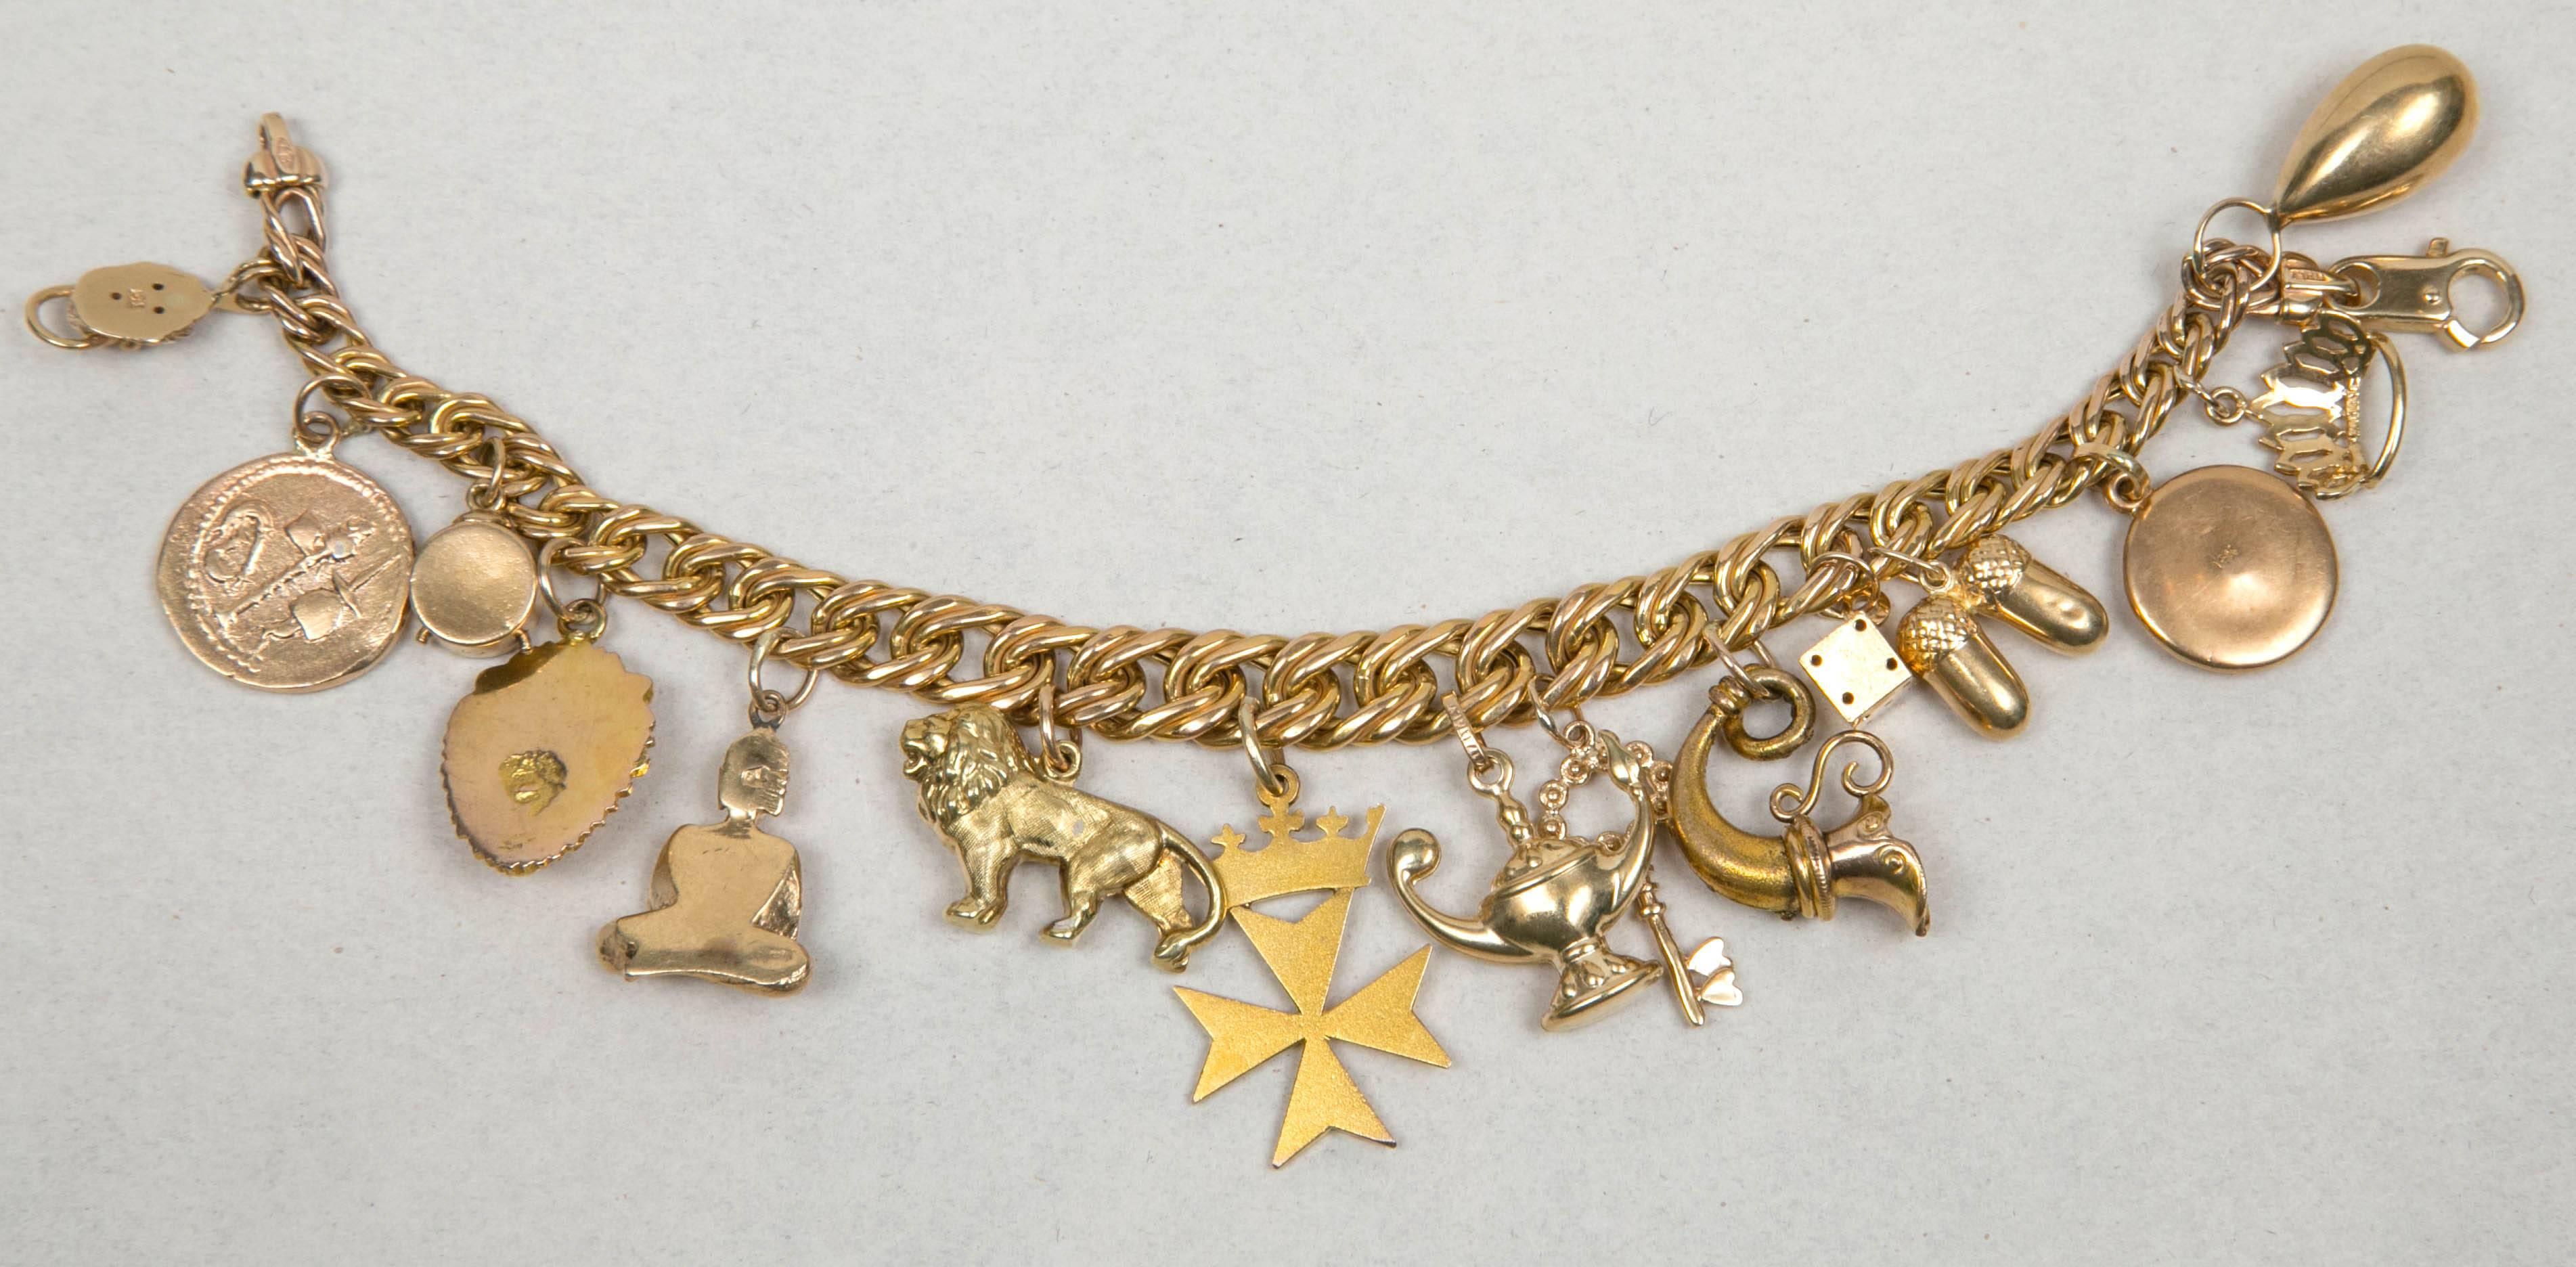  Victorian And Mid Century Charm Bracelet For Sale 2